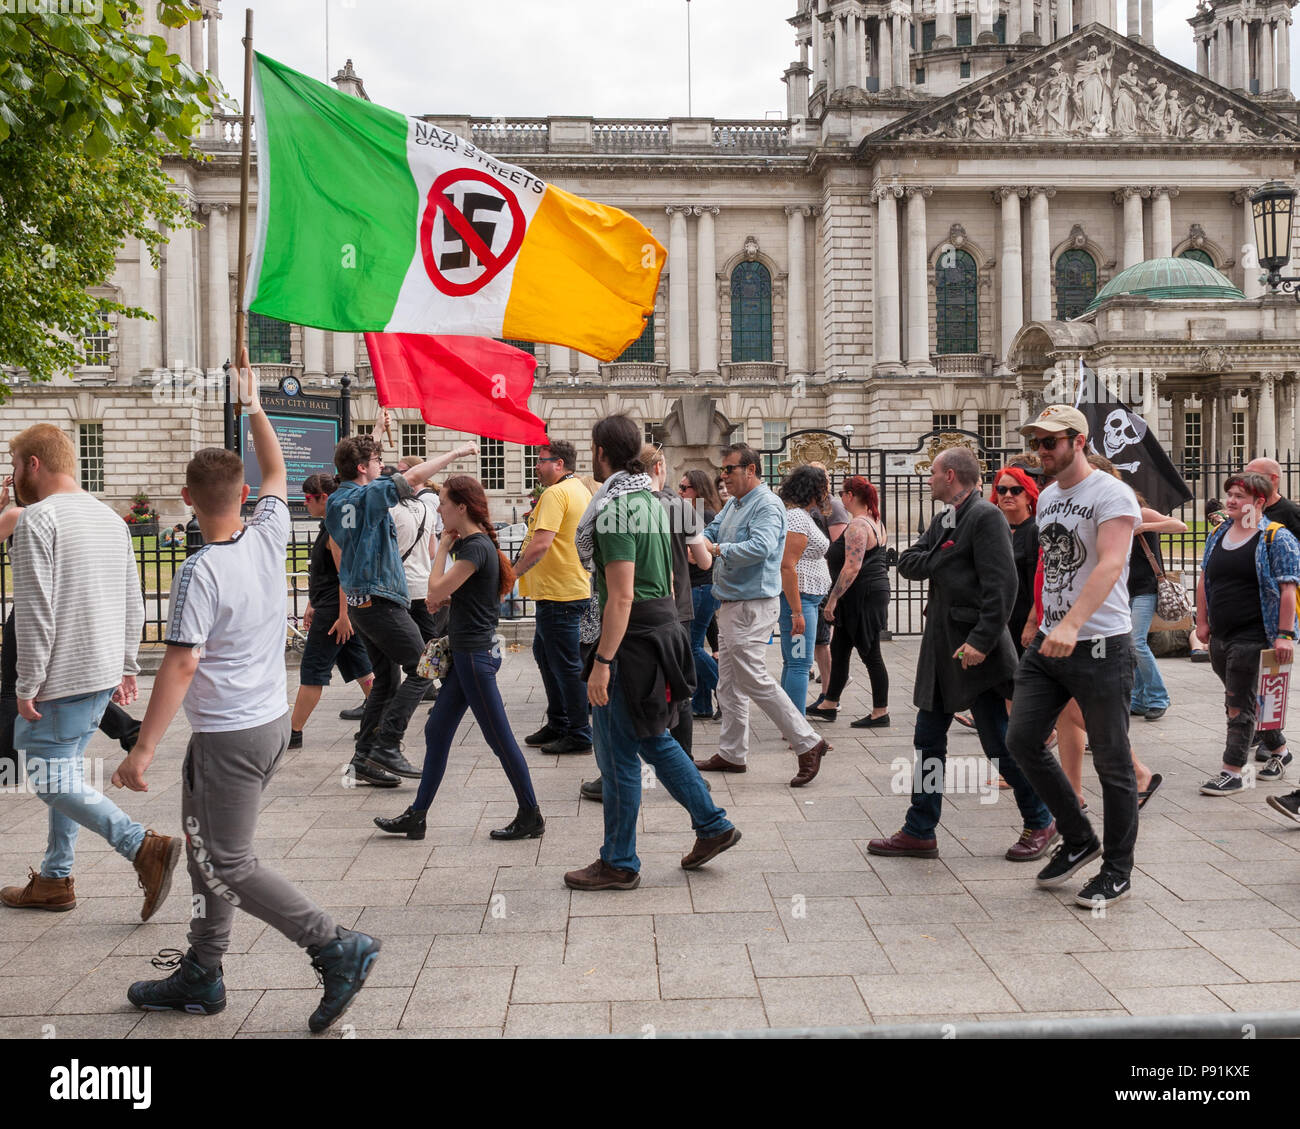 Belfast, Northern Ireland, U.K. 14 July 2018. U.K. Freedom Rally organised by Independent Belfast City Councillor Jolene Bunting held at the City Hall. The Rally had been advertised on social media and by a leaflet drop to address concerns: 'Immigration, suppression of Free-Speech, biased “Fake News” media, injustice & the Globalist/EU agenda'. There were two counter protests also held. Credit: John Rymer/Alamy Live News Stock Photo